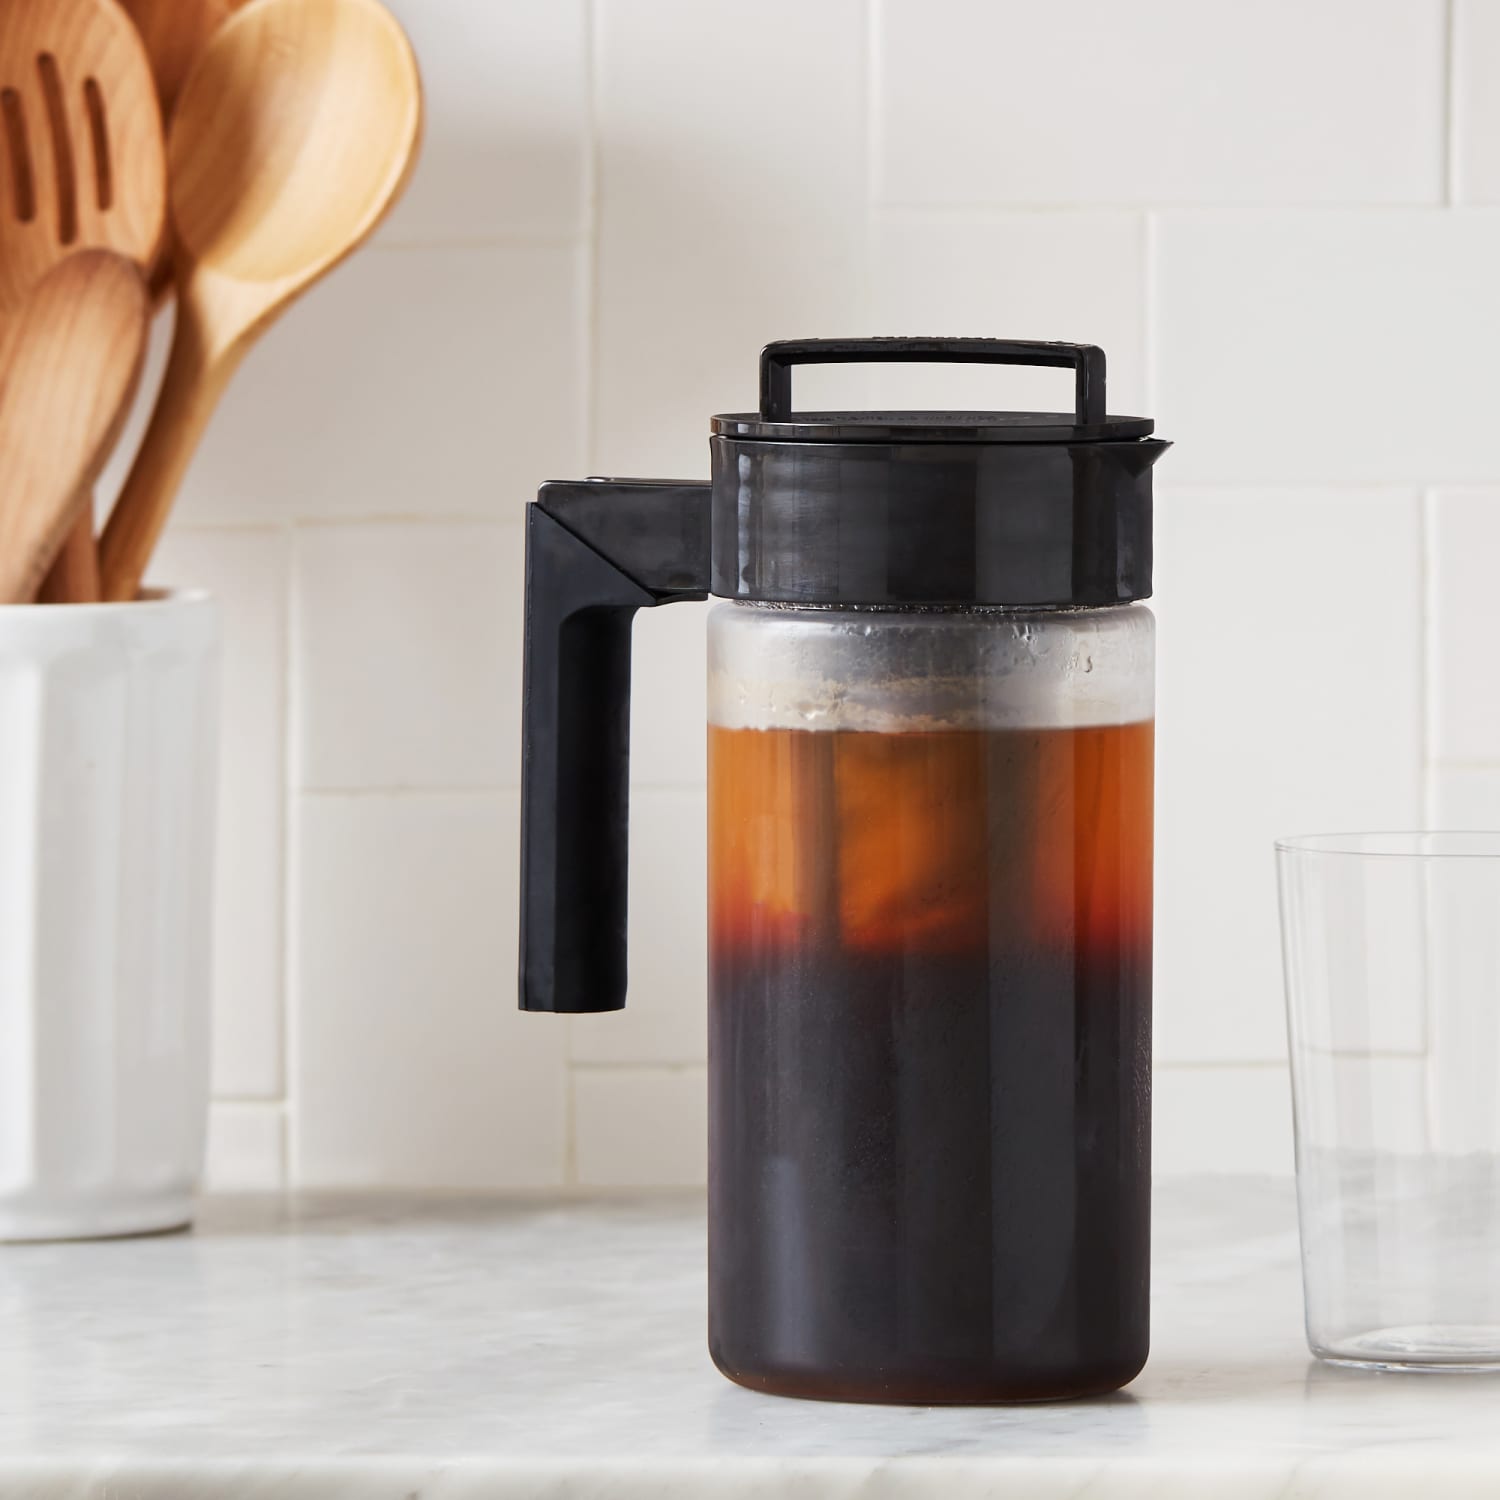 The Easy Cold Brew Maker Kitchn Editors Swear By Is on Sale for Just $20